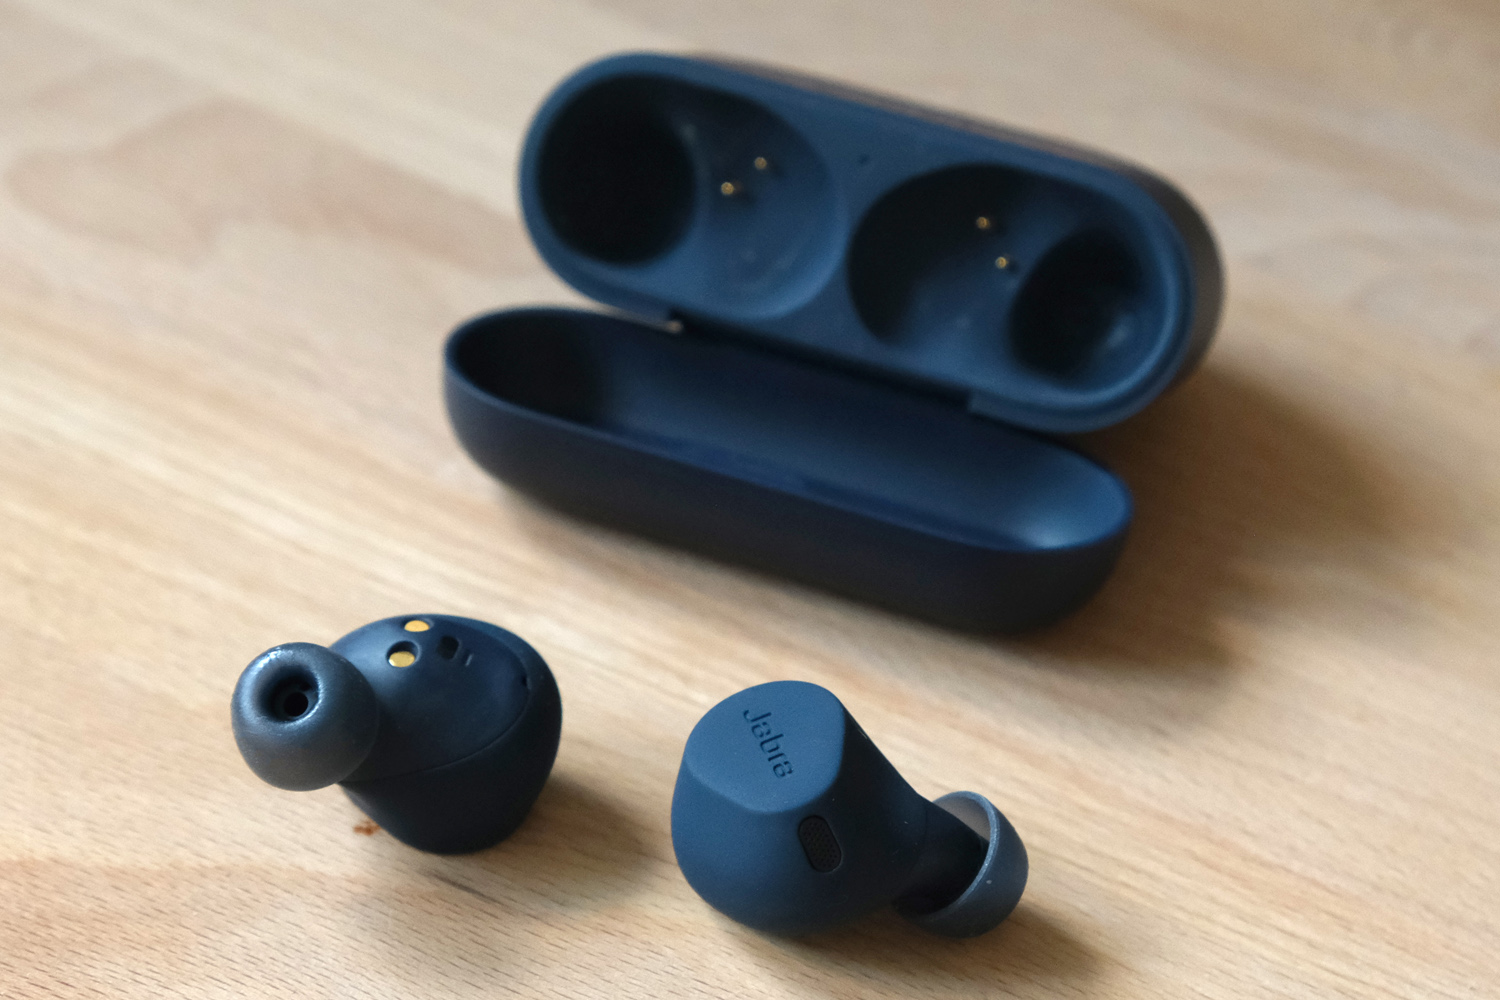 Jabra launches Elite 10 and Elite 8 Active earbuds for work and play